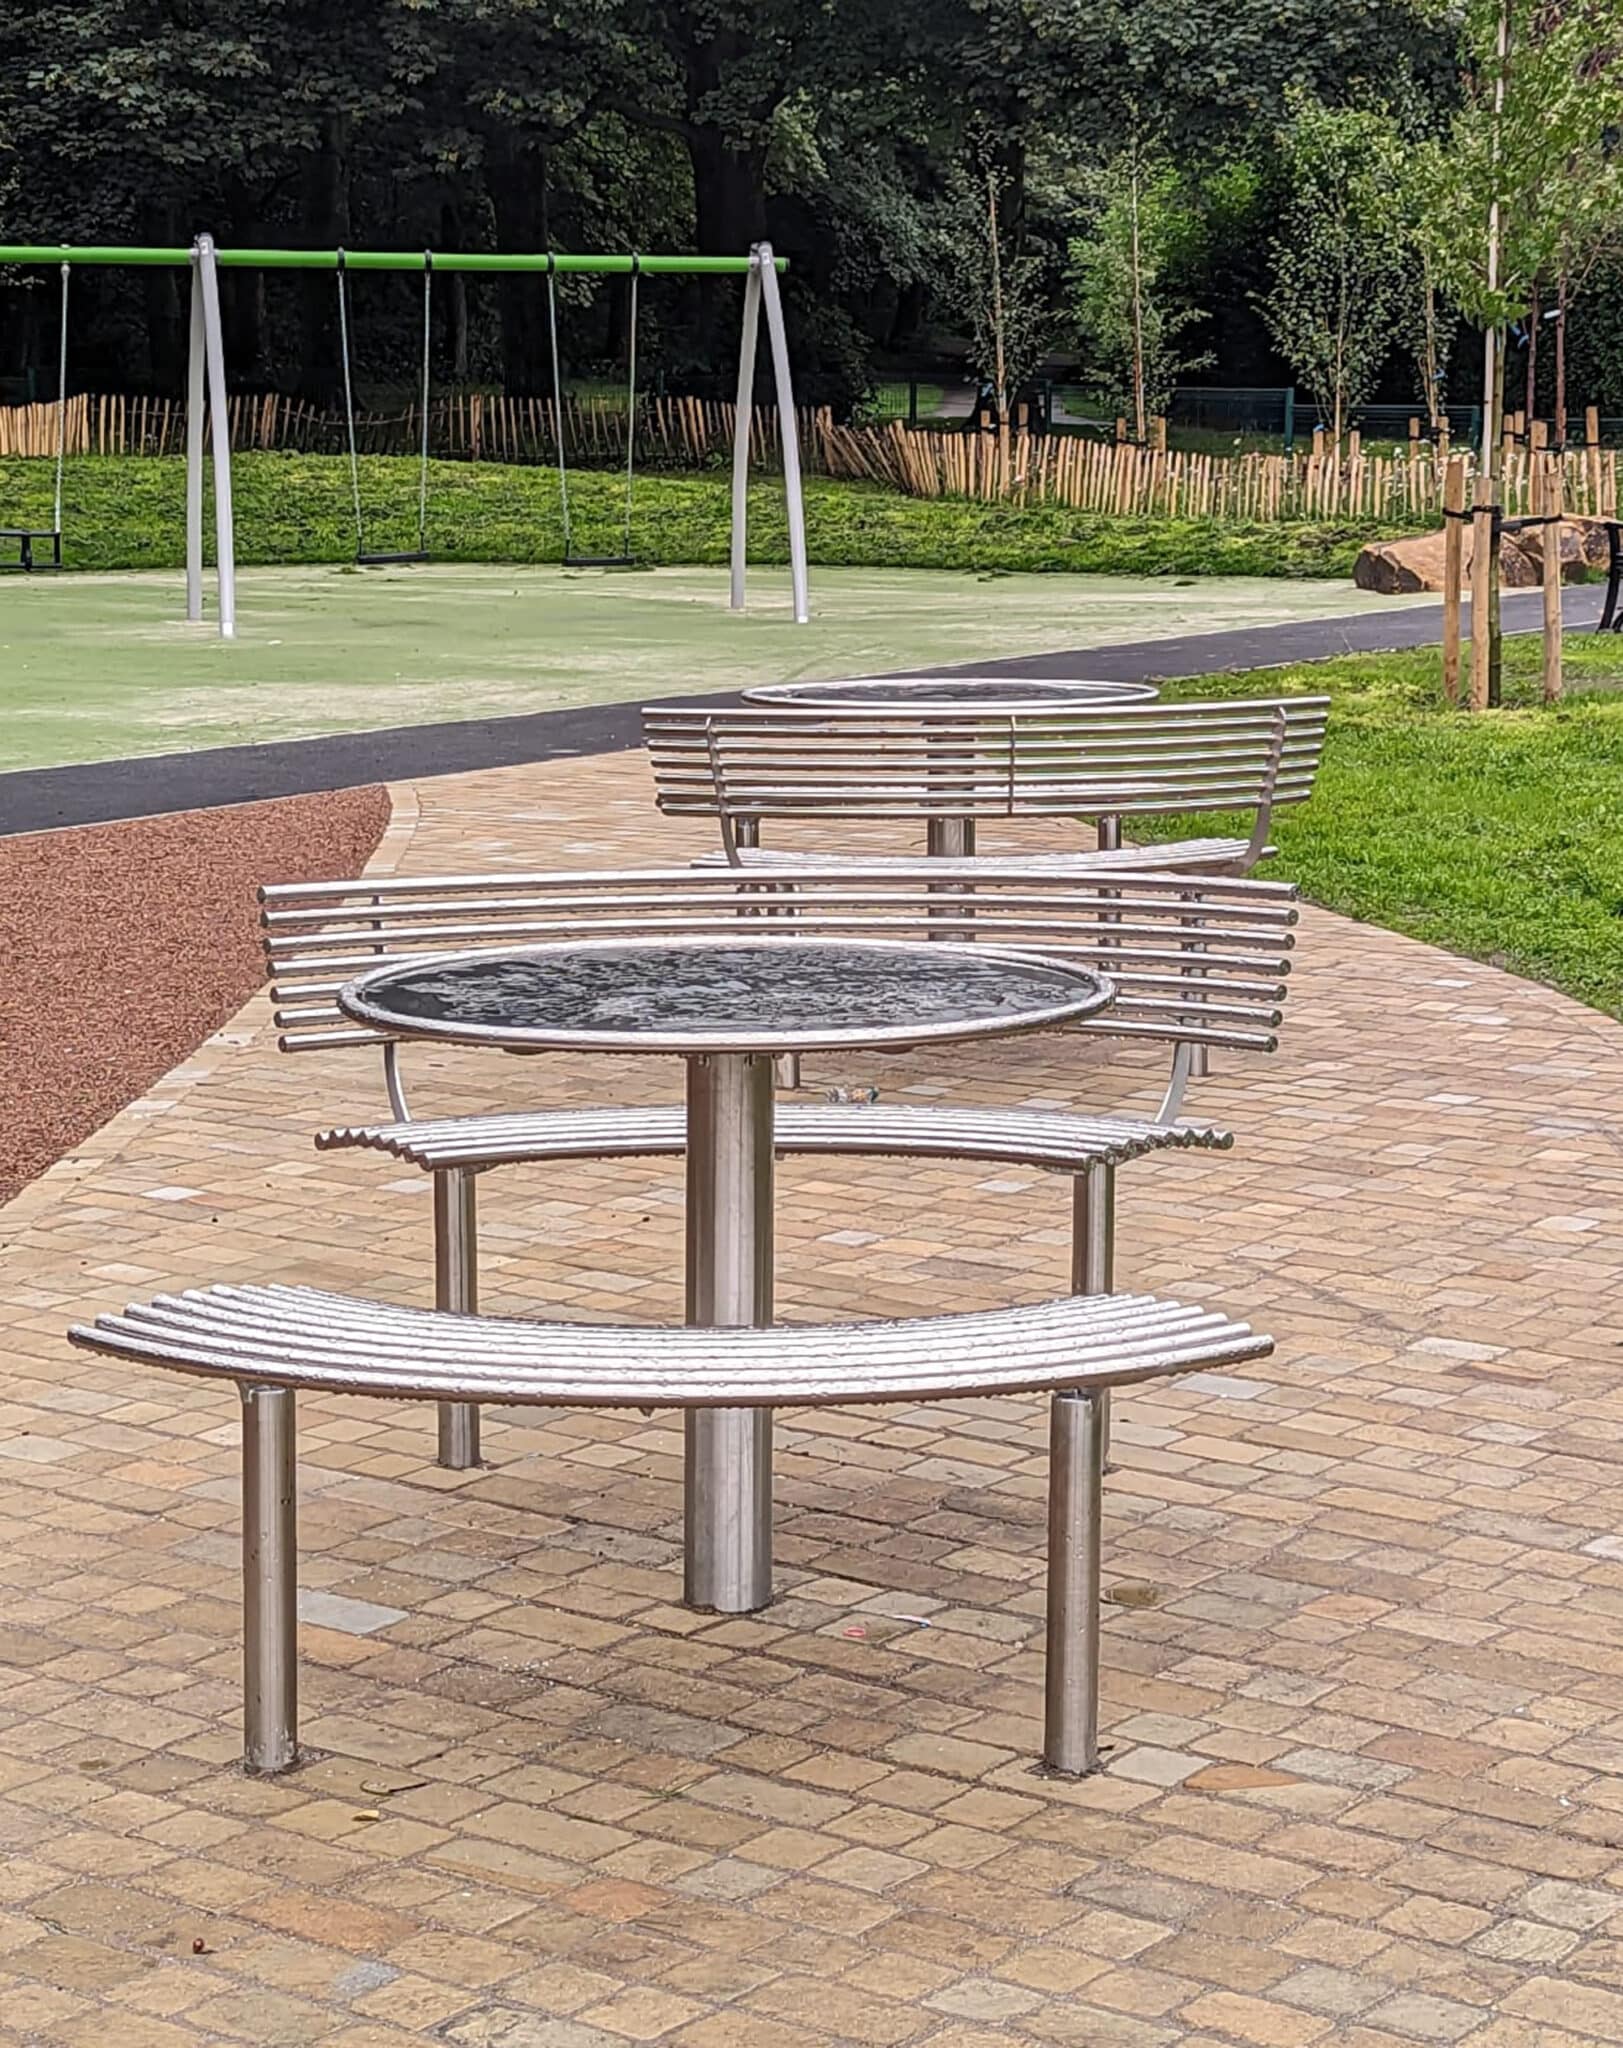 Round picnic table with curved seat and bench